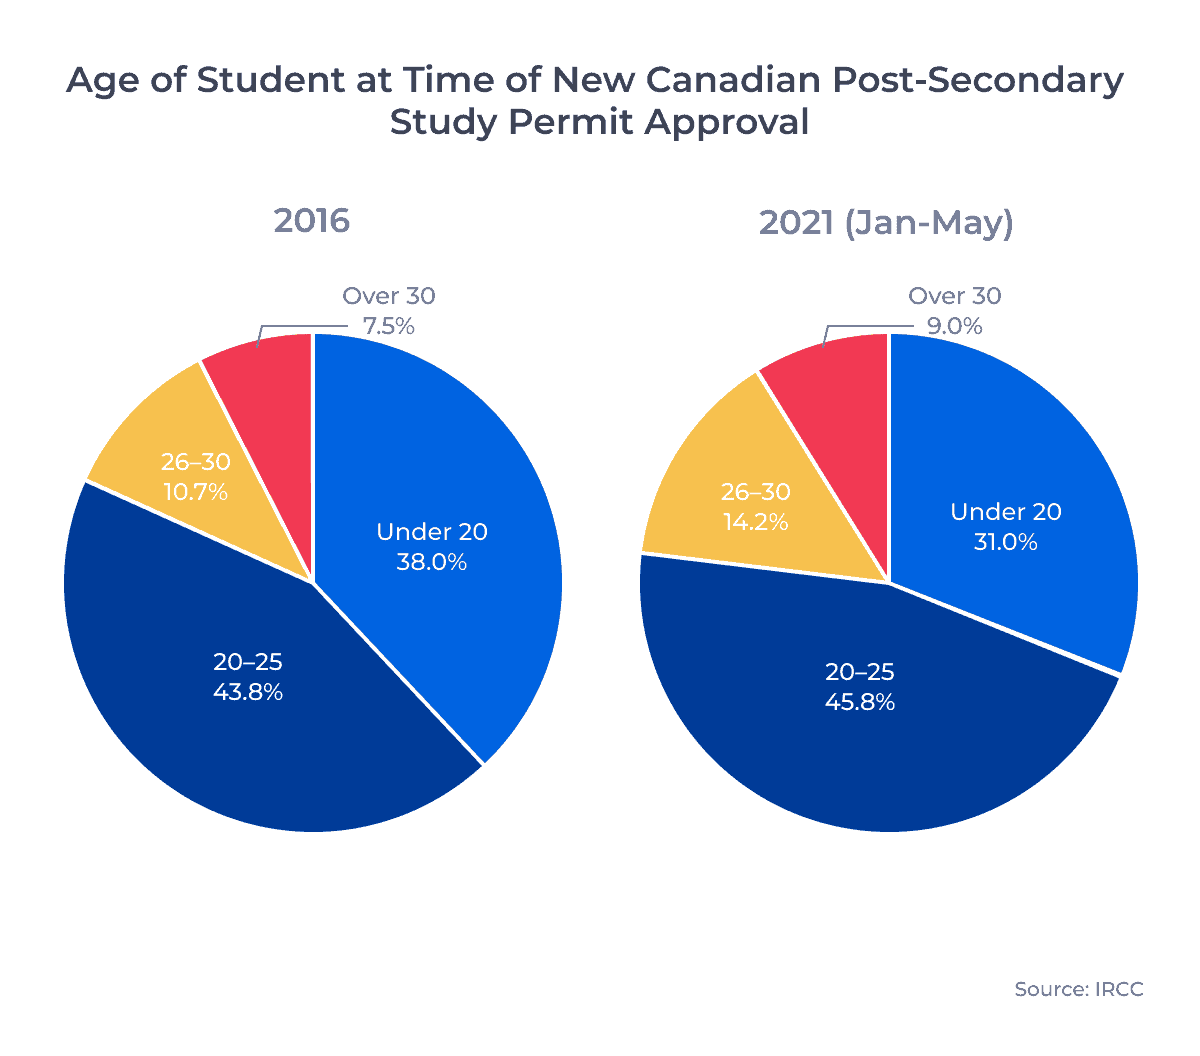 Age of Student at Time of New Canadian Post-Secondary Study Permit Approval